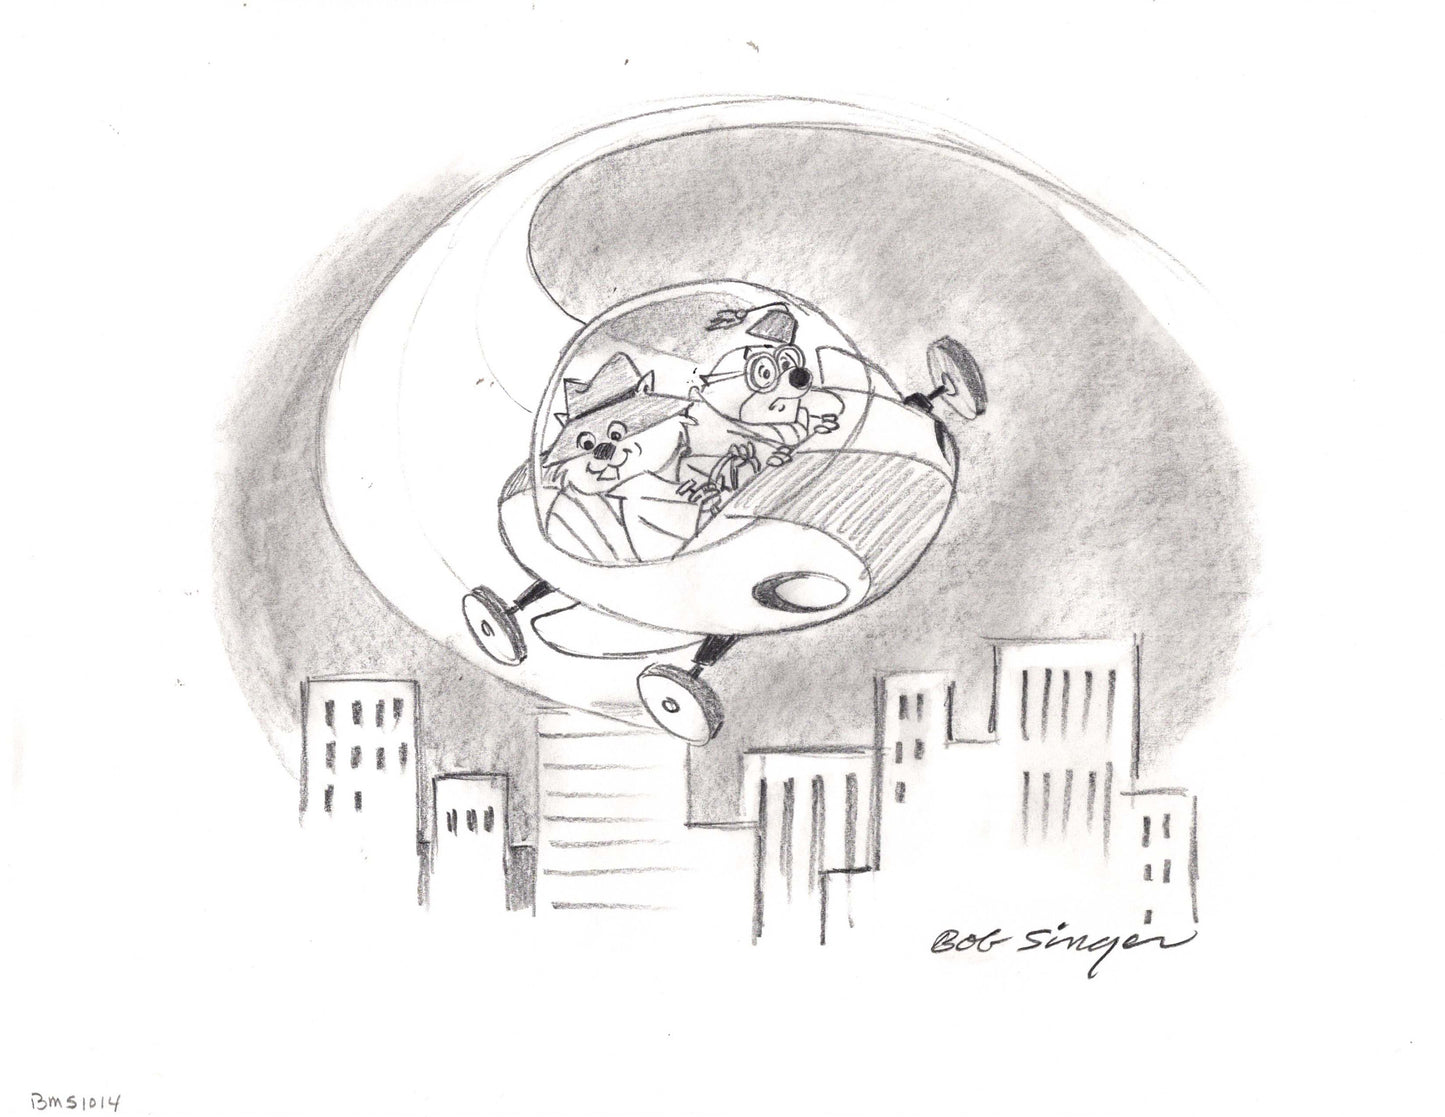 Secret Squirrel Pencil Scene Drawing Signed by Bob Singer Based on the Hanna Barbera Characters